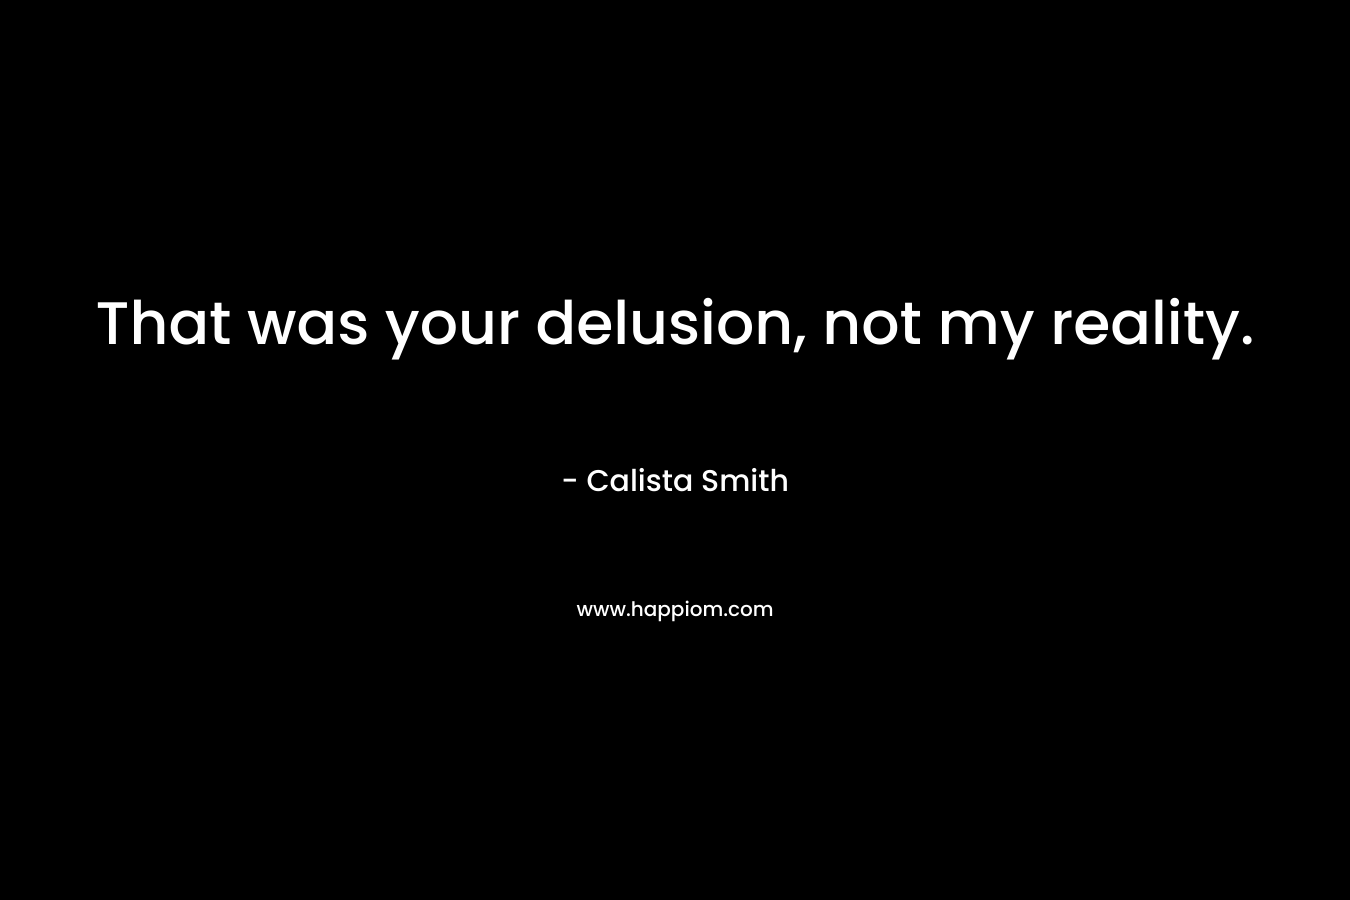 That was your delusion, not my reality. – Calista Smith